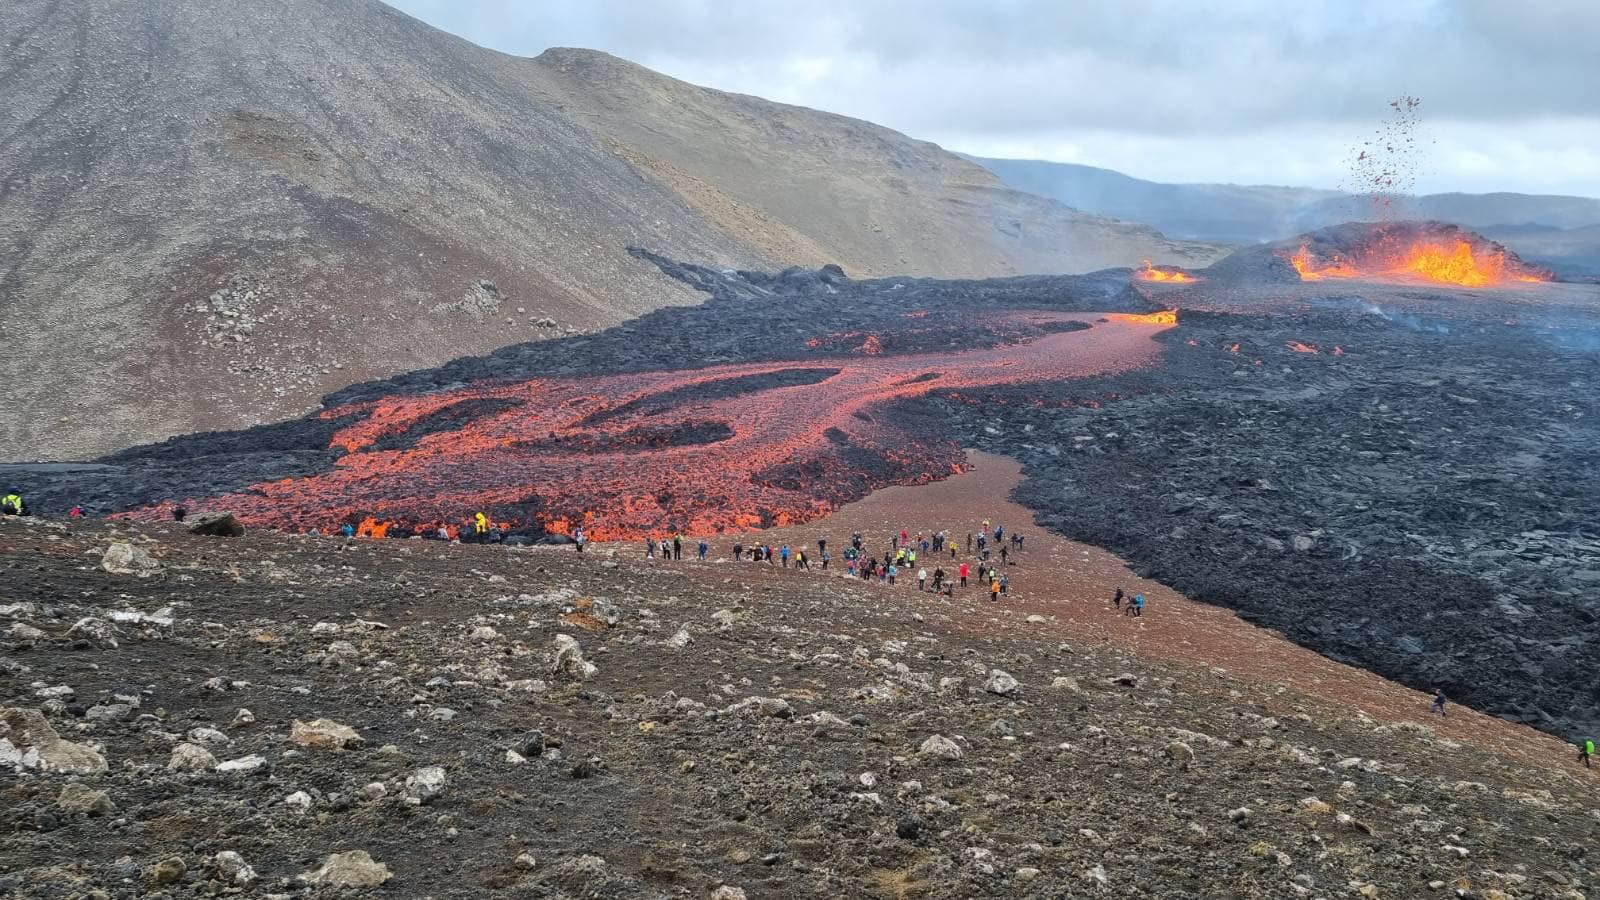 Flowing lava with the erupting spatter cone in the background (image: almannavarnir)